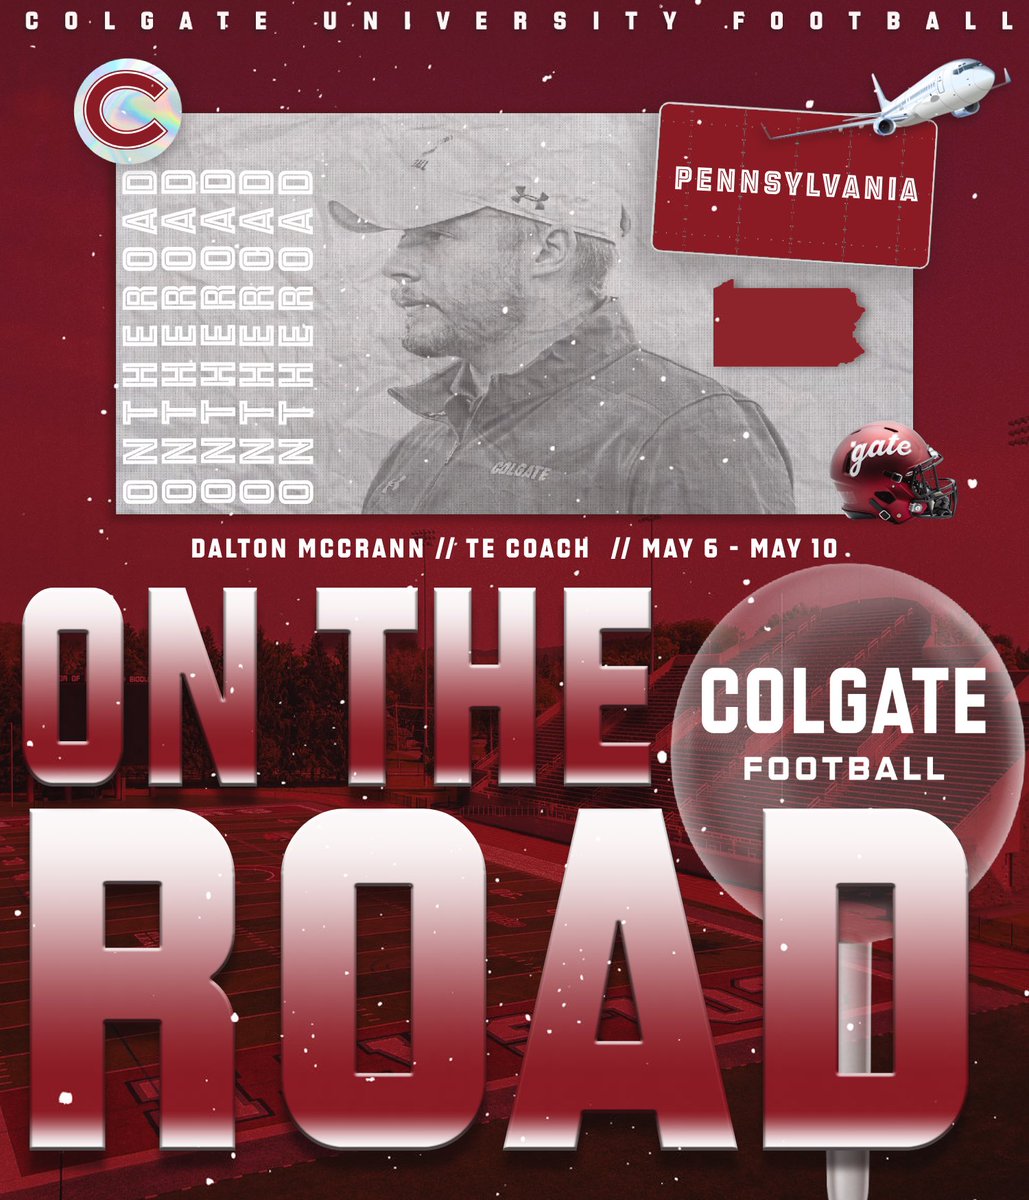 PA 2025s you’re on the clock!! ⏰ Spending the week in the Keystone state talking to the future of @ColgateFB ‼️👀⏳ #GoGate 🔴⚪️⚔️